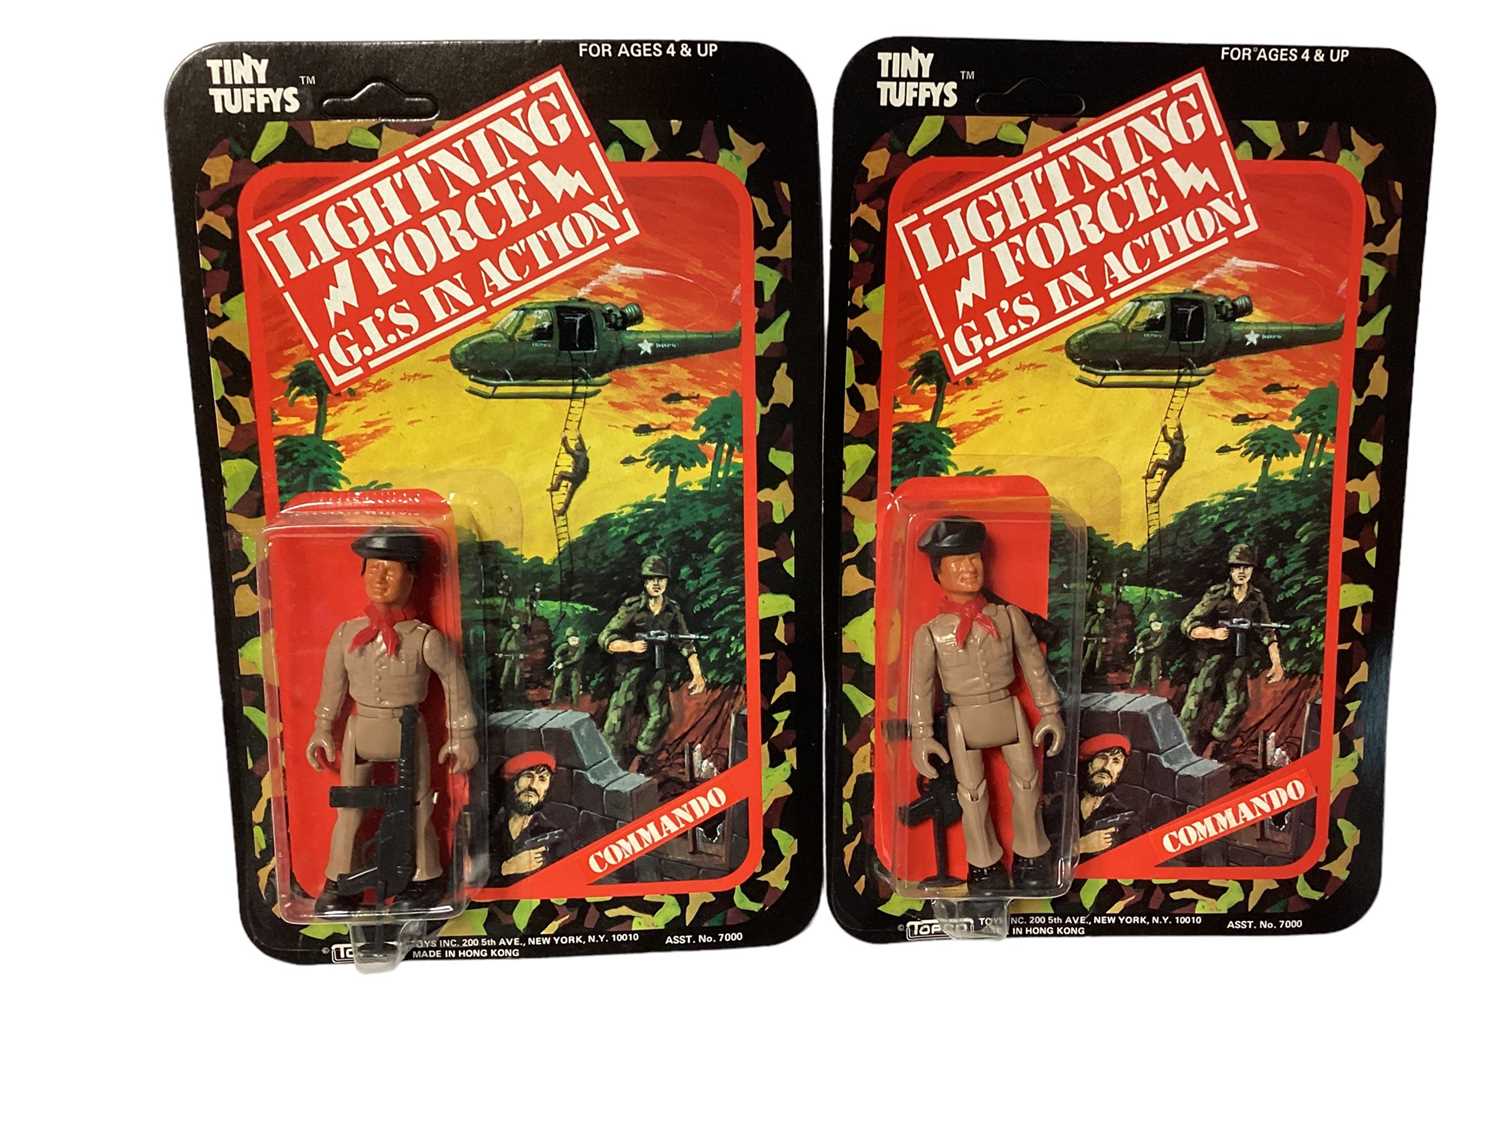 Topco Tiny Tuffys (c1970's) Lightning Force G.I's in Action 3 1/2" action figures including Infantry - Image 2 of 4